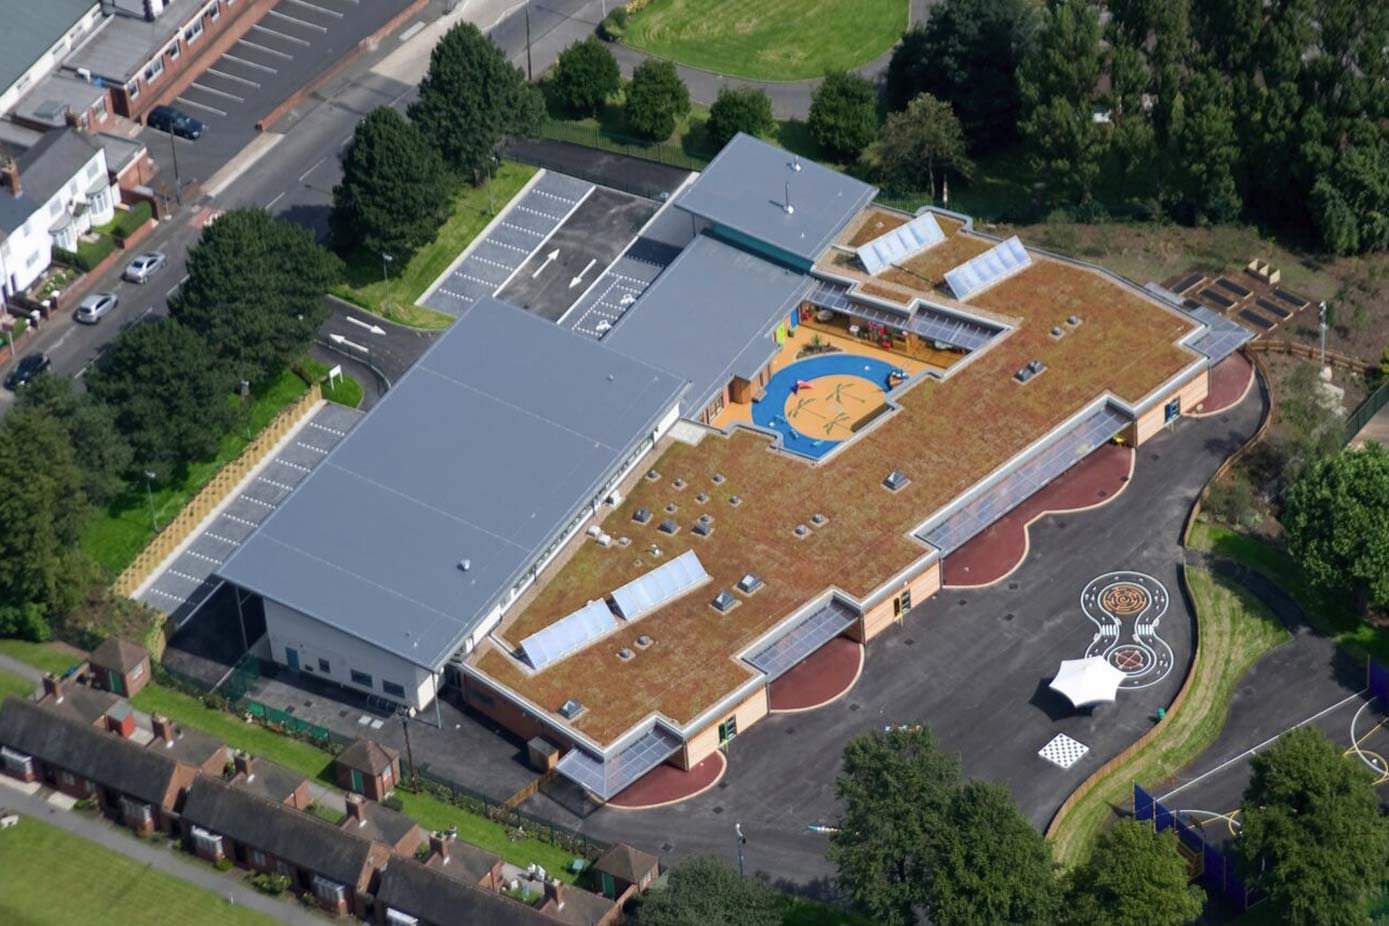 Sage Roofing installed a green roof at Crocketts Primary School